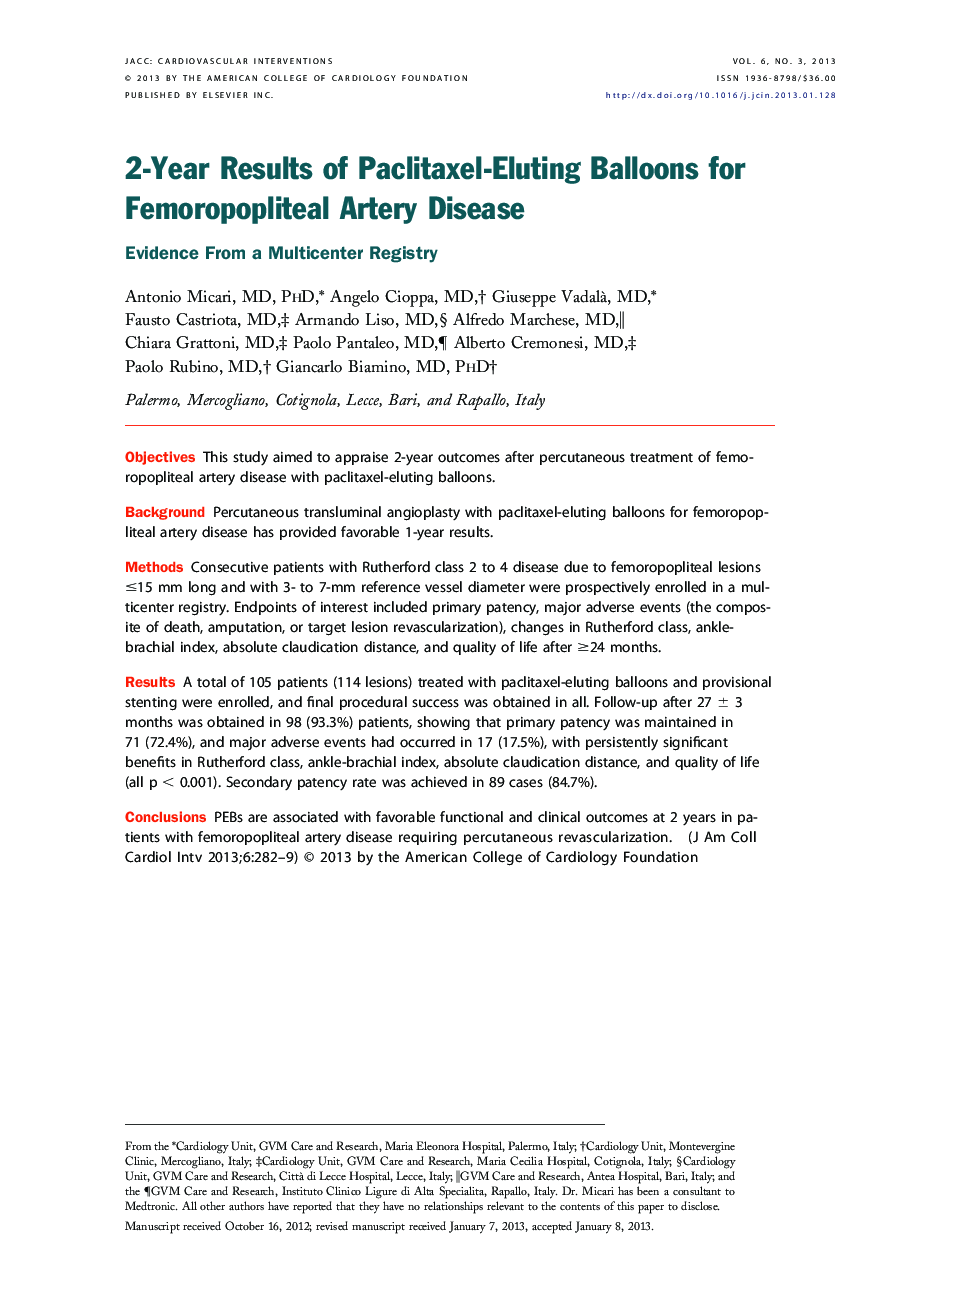 2-Year Results of Paclitaxel-Eluting Balloons for Femoropopliteal Artery Disease : Evidence From a Multicenter Registry